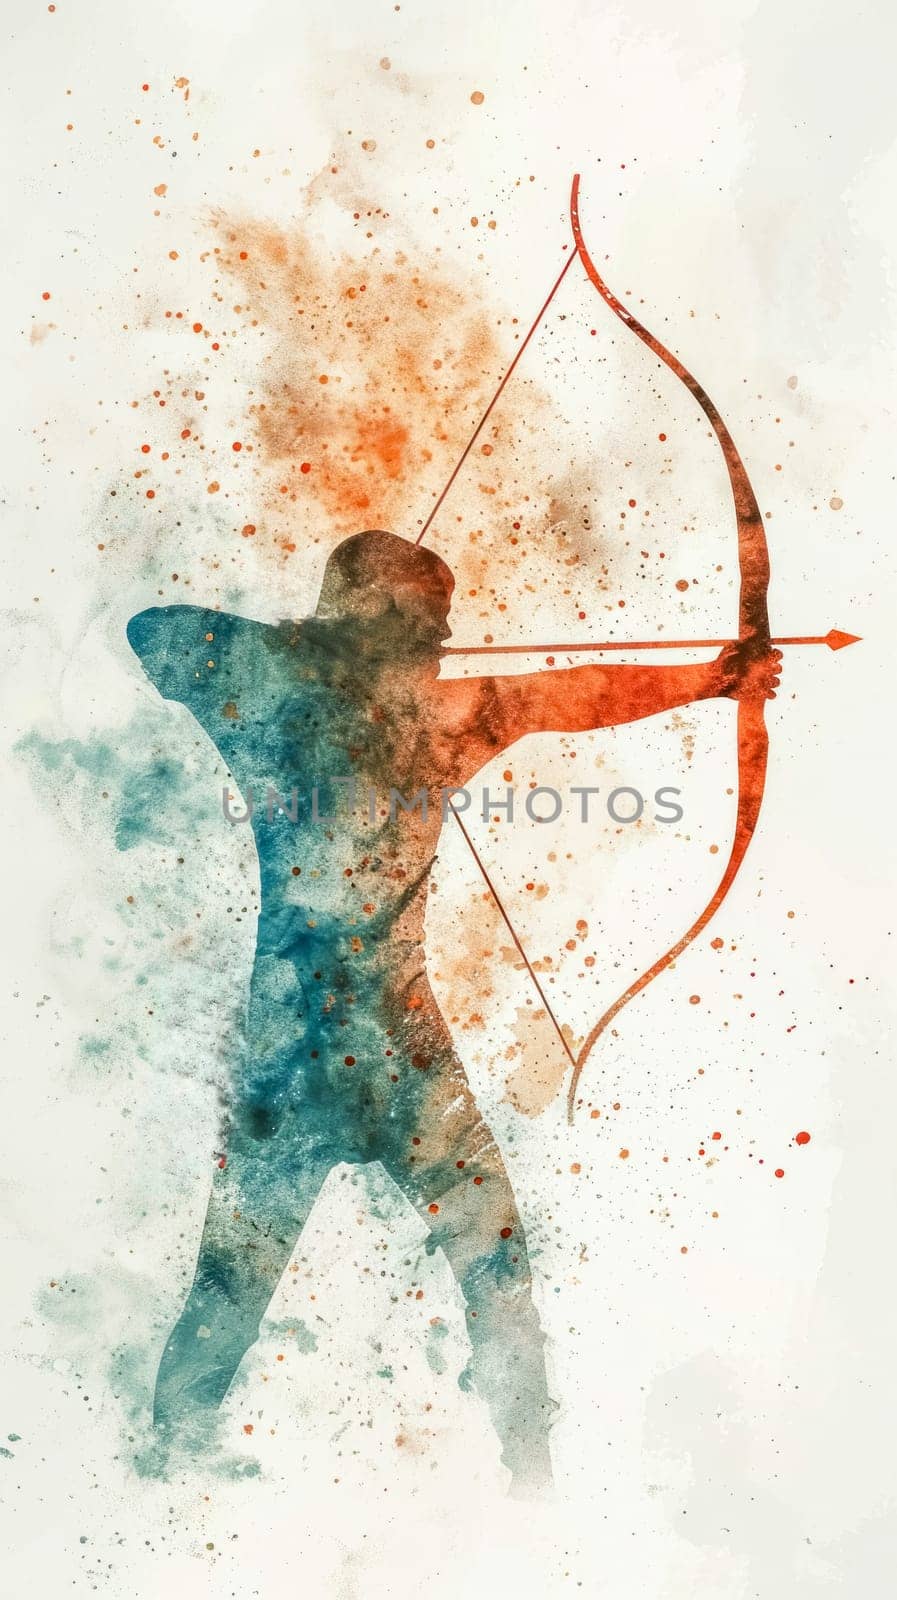 A silhouetted archer, crafted in watercolor splashes of blue and red, pulls back on a bow, poised to release an arrow, set against a splattered, textured background, vertical